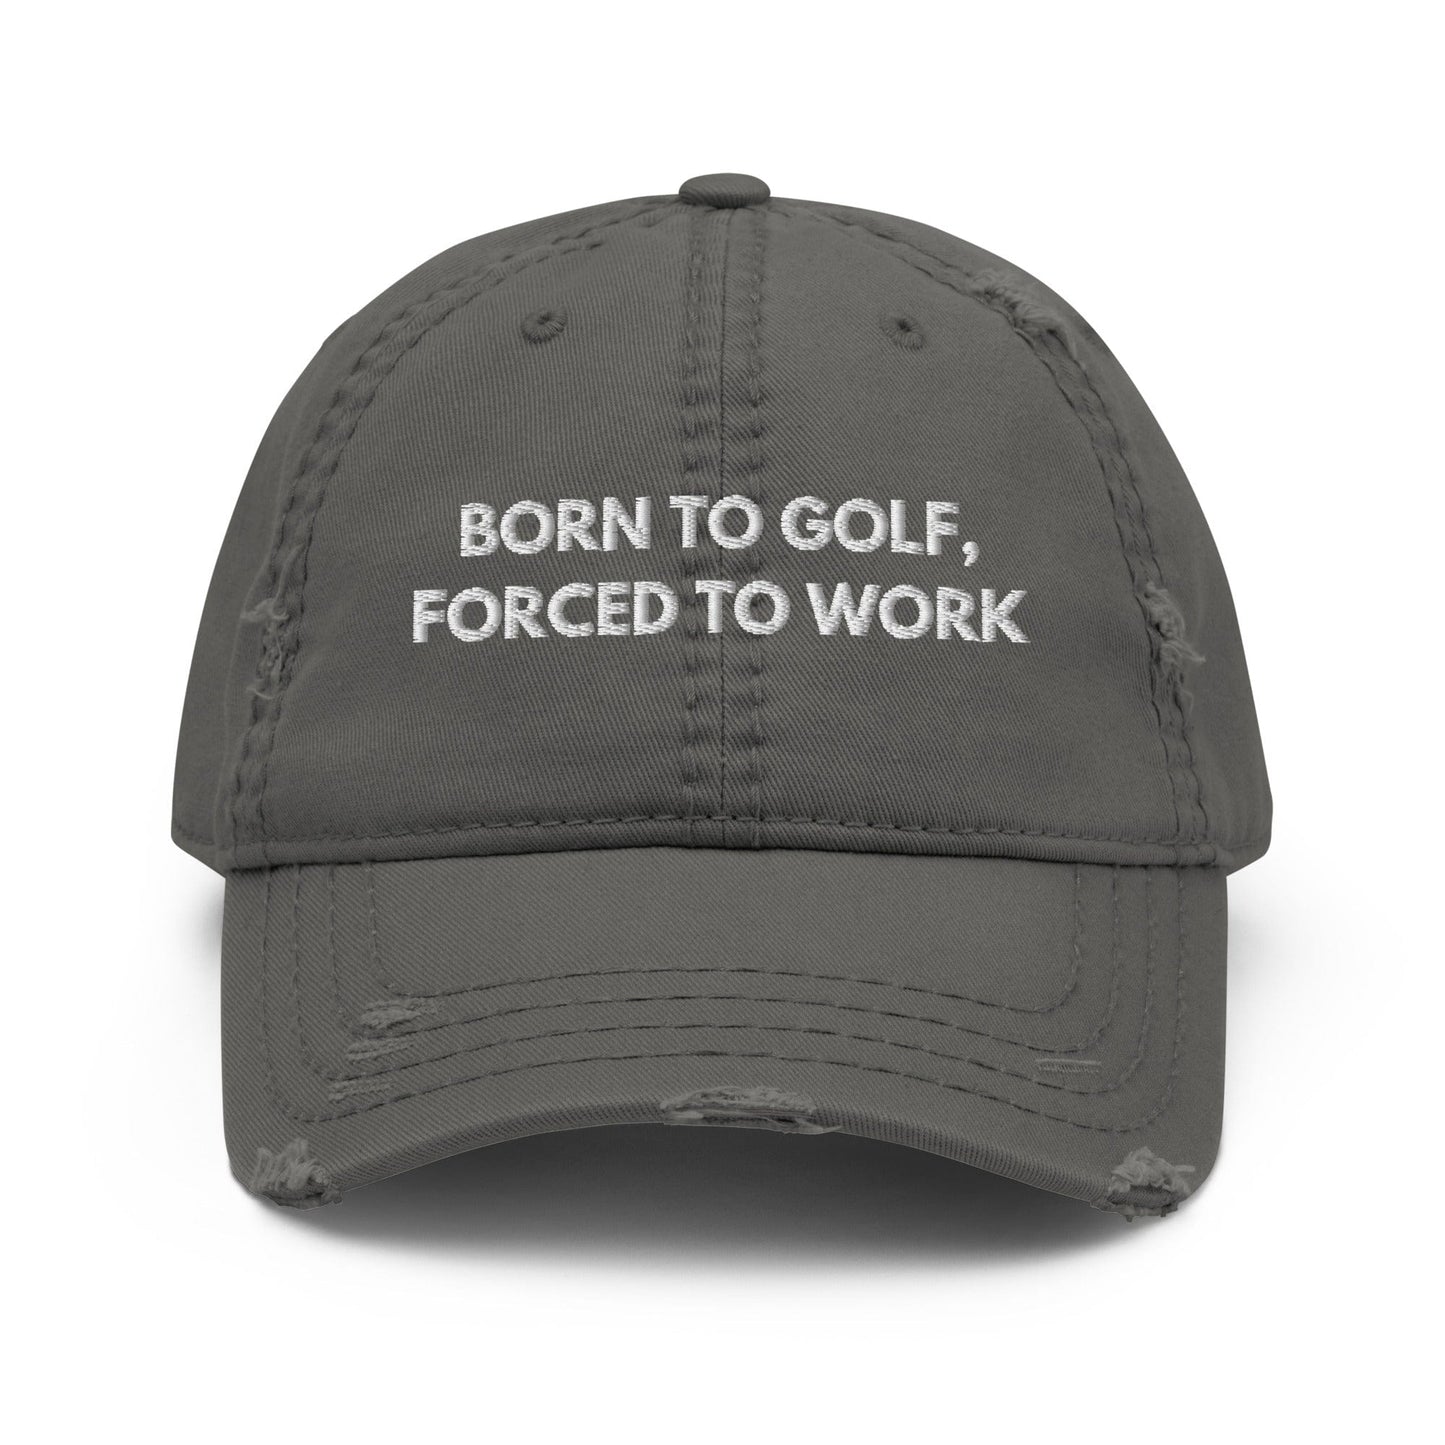 Funny Golfer Gifts  Distressed Cap Charcoal Grey Born to Golf, Forced To Work Hat Distressed Hat